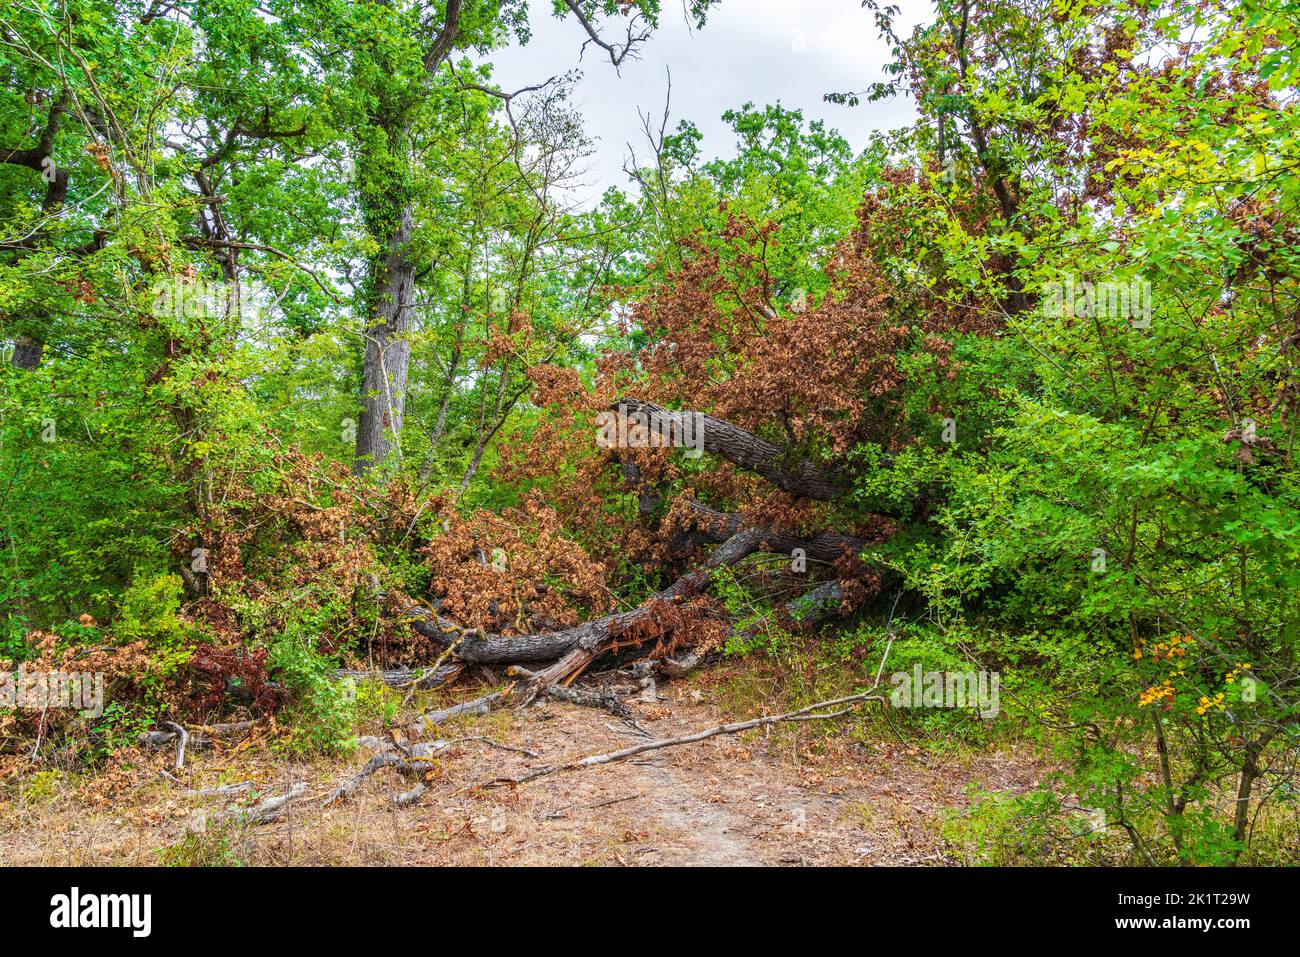 Fallen dry tree in the green forest Stock Photo